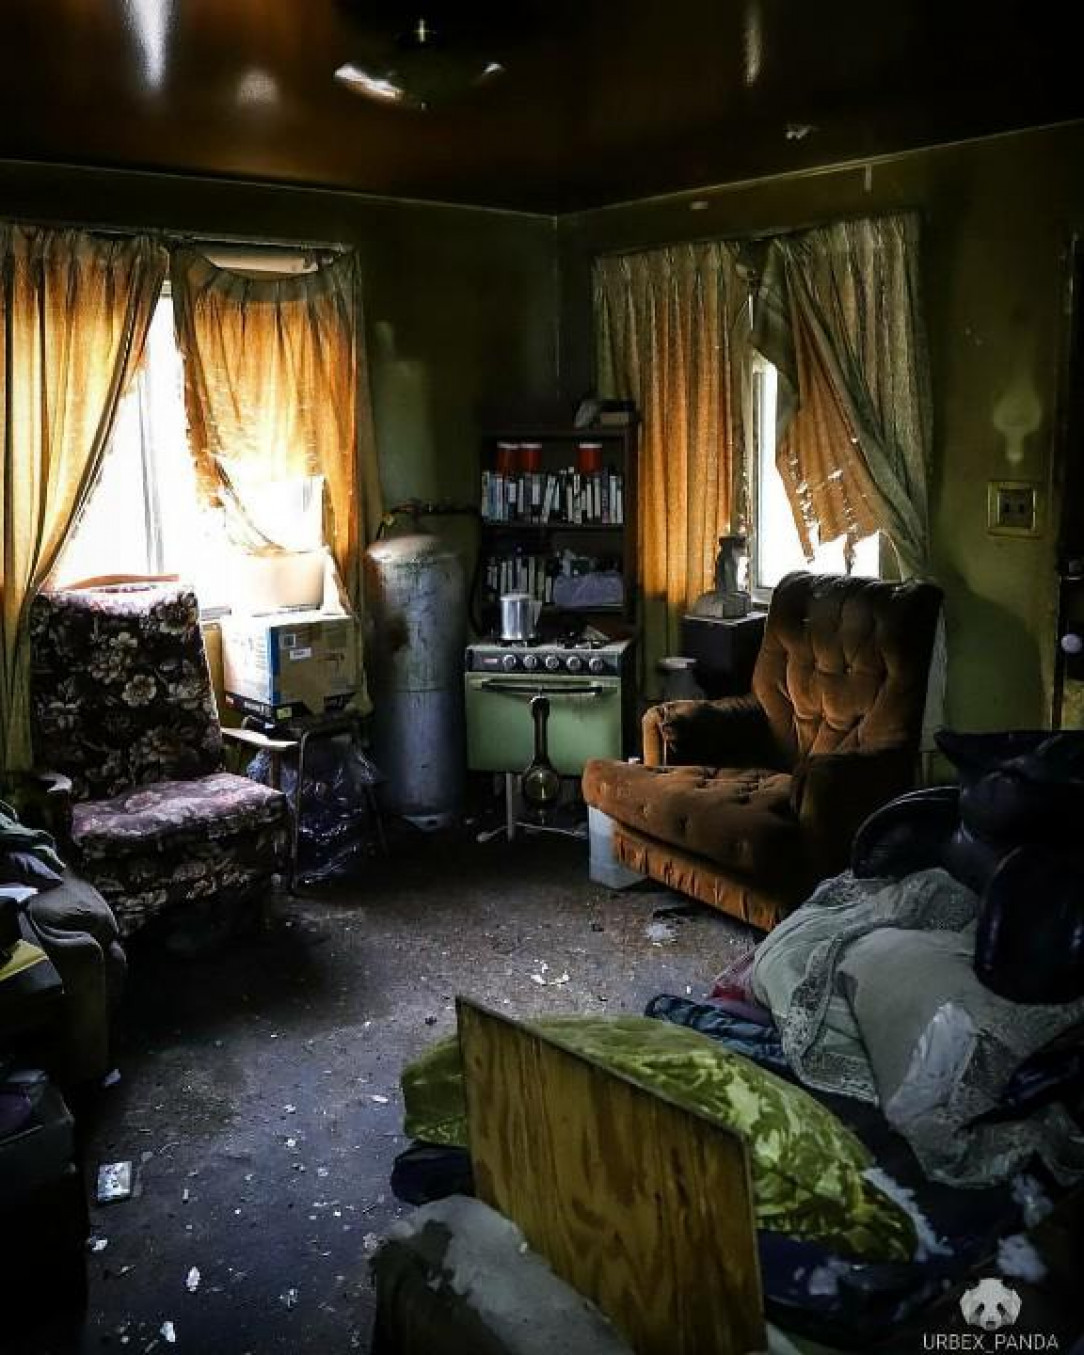 House Sits Fully Abandoned With Everything Inside. Odly Terrifying Time Capsule House